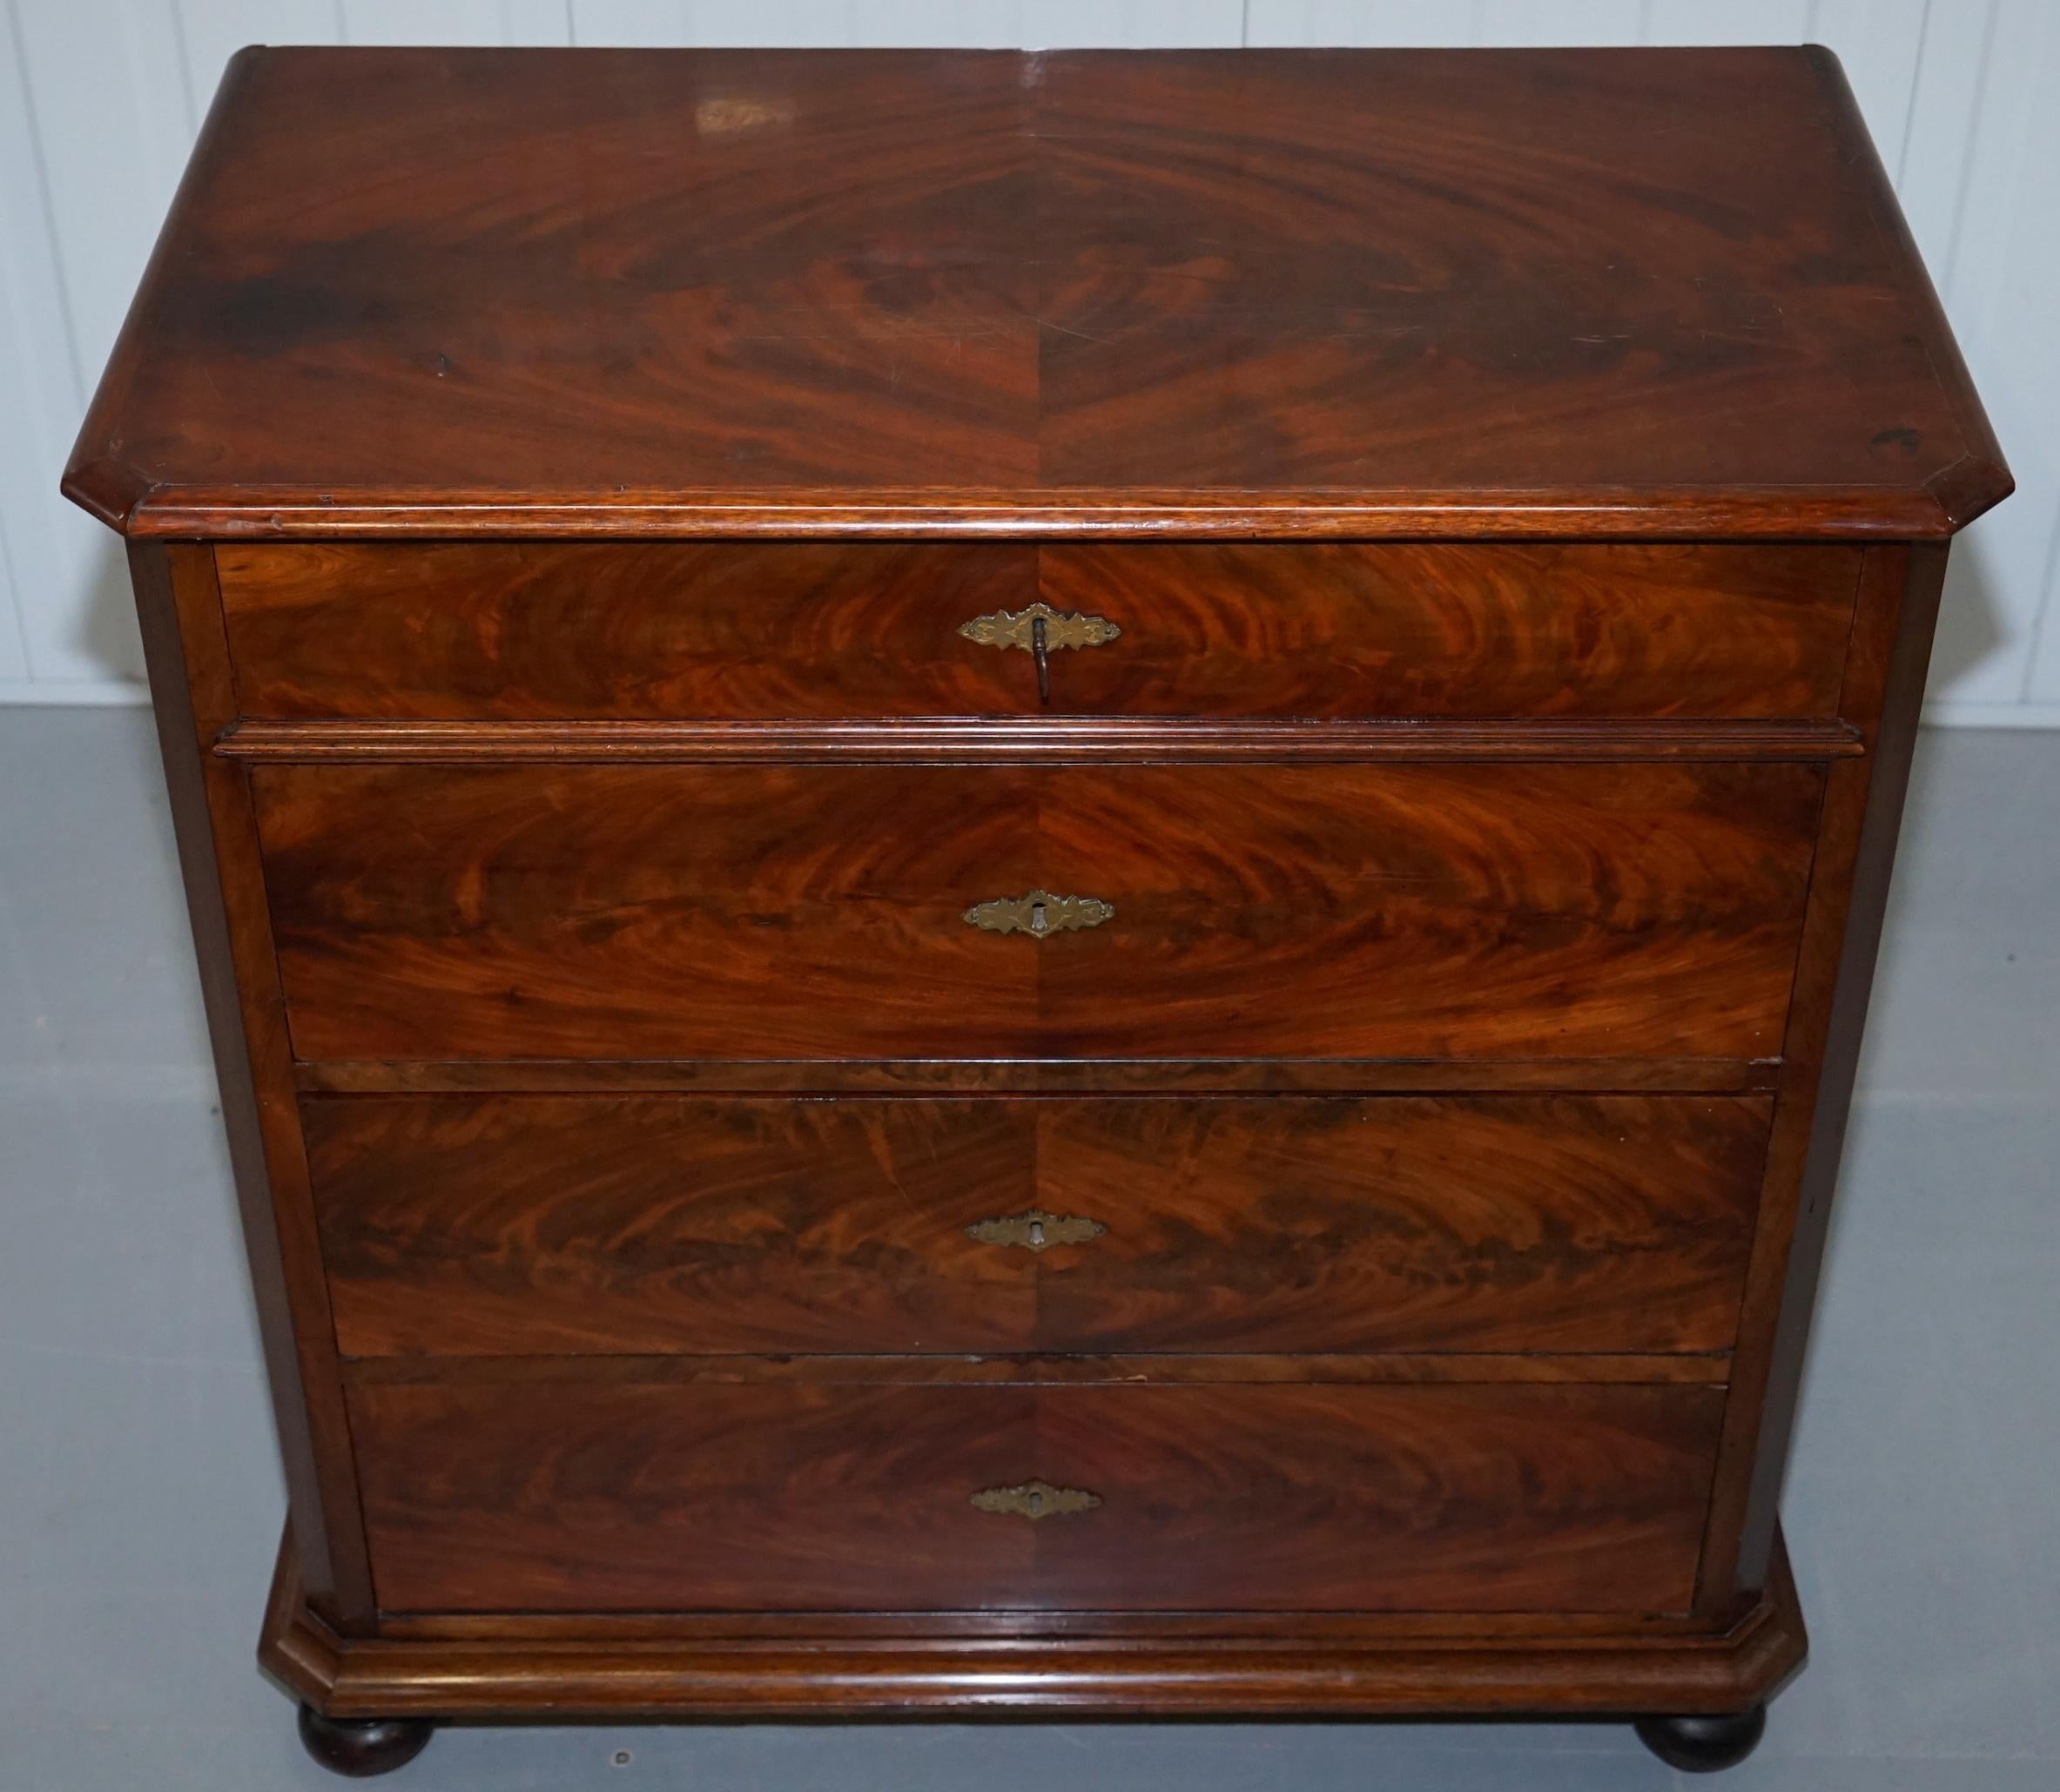 Hand-Carved Stunning Biedermeier Flamed Mahogany Small Chest of Drawers Rare Find circa 1820